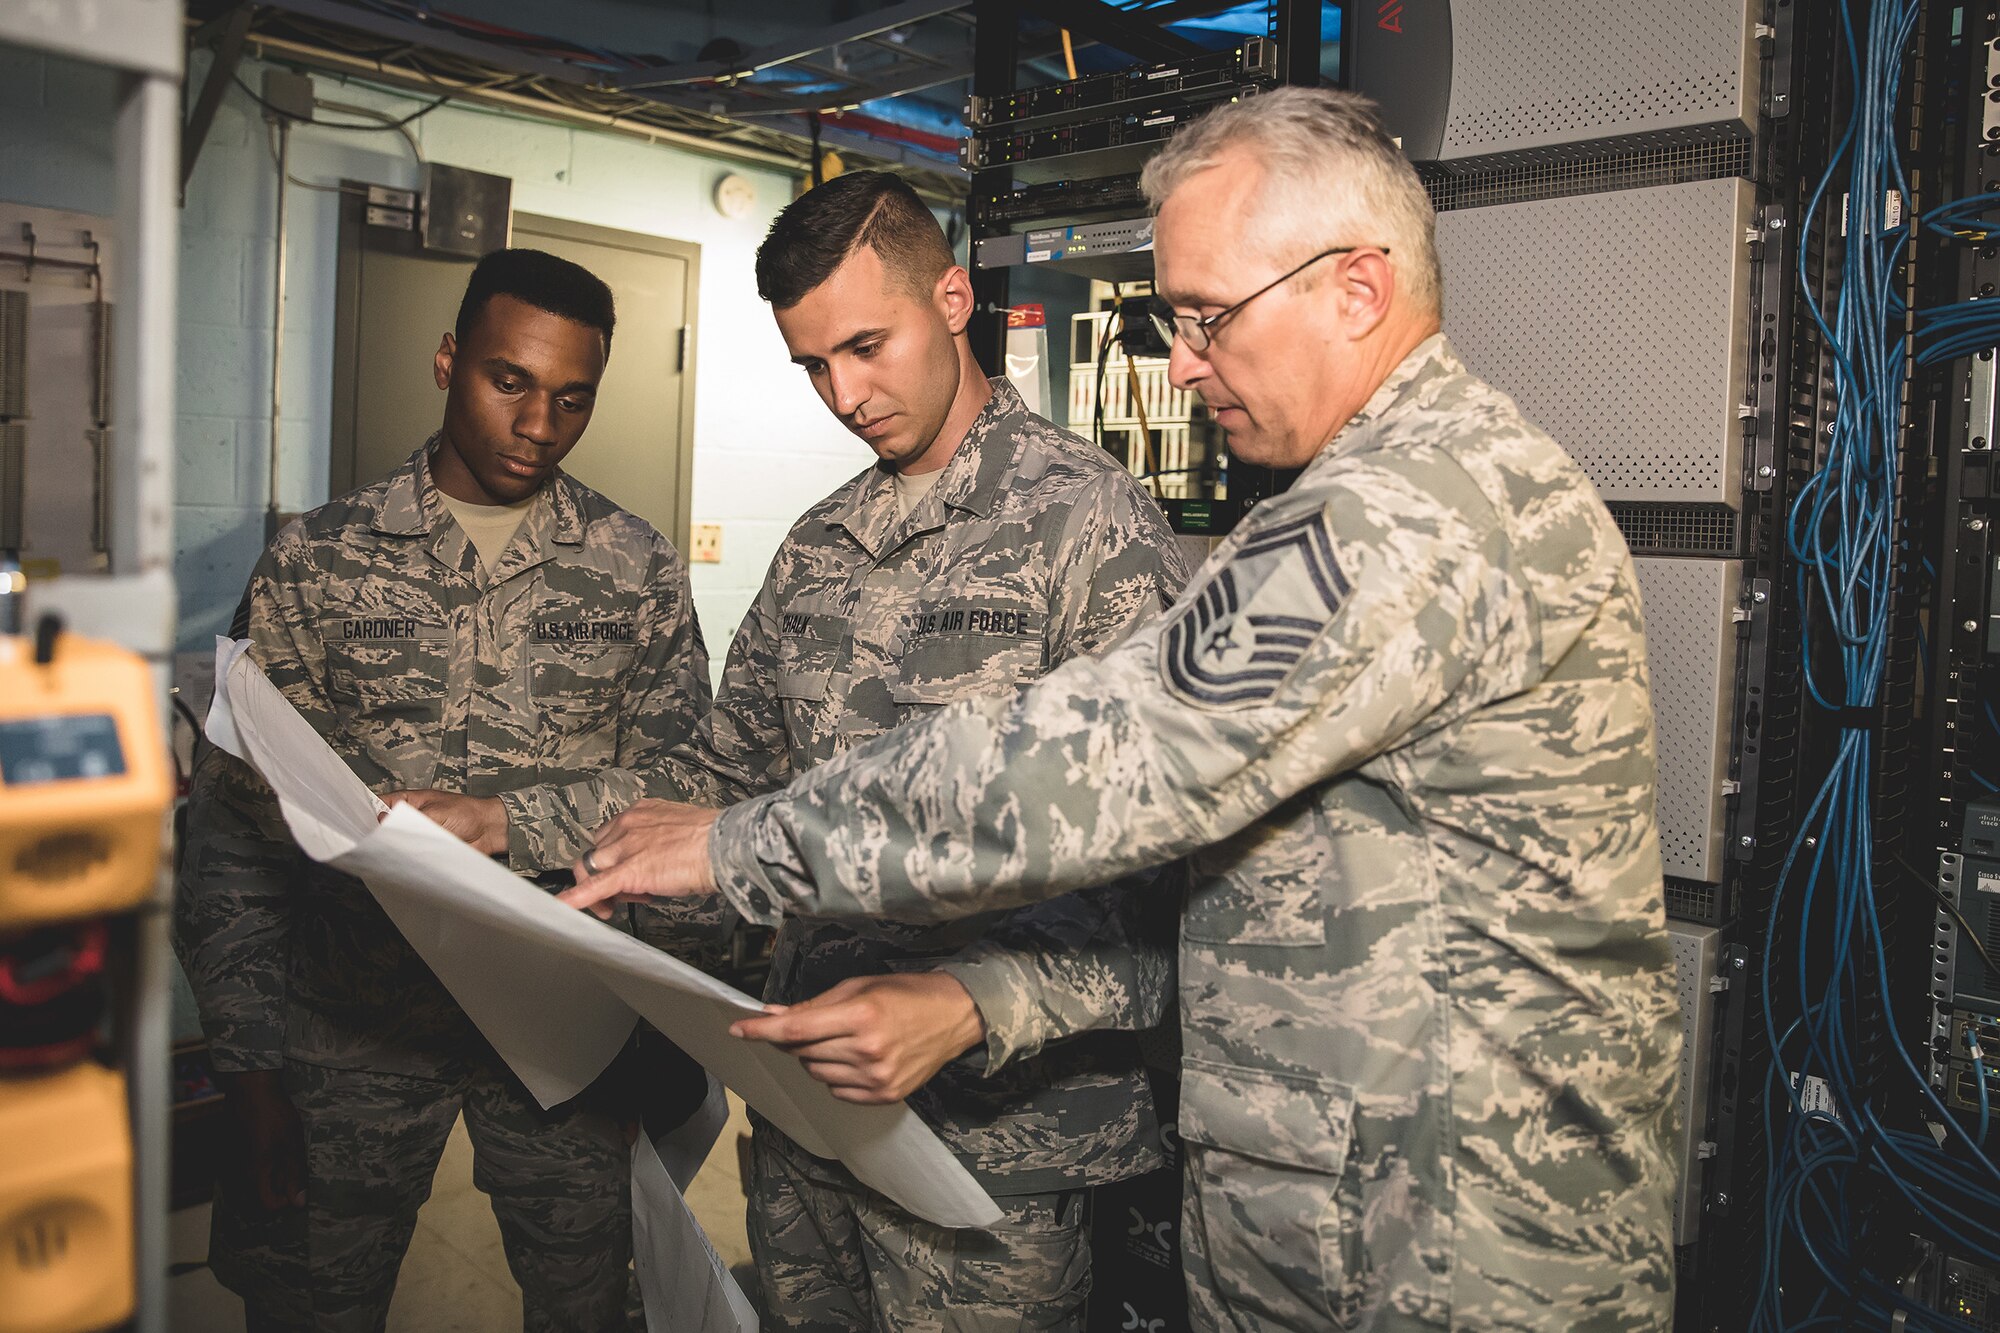 U.S. Air Force Senior Master Sgt. Mark Buchanan, right, superintendent, Staff Sgt. Charles Chalk, center, cable and antenna technician, and Staff Sgt. Wilson Gardner, airfield systems technician, from the 202d Engineering Installation Squadron (EIS), Georgia Air National Guard (ANG), review technical drawings at Muñiz ANG Base in San Juan, Puerto Rico, April 19, 2018. The 202d EIS deployed to the Puerto Rico Air National Guard’s 156th Airlift Wing as part of the Hurricane Irma and Maria recovery efforts to spearhead a large-scale project relocating communications systems cabling and equipment to a new hardened facility.